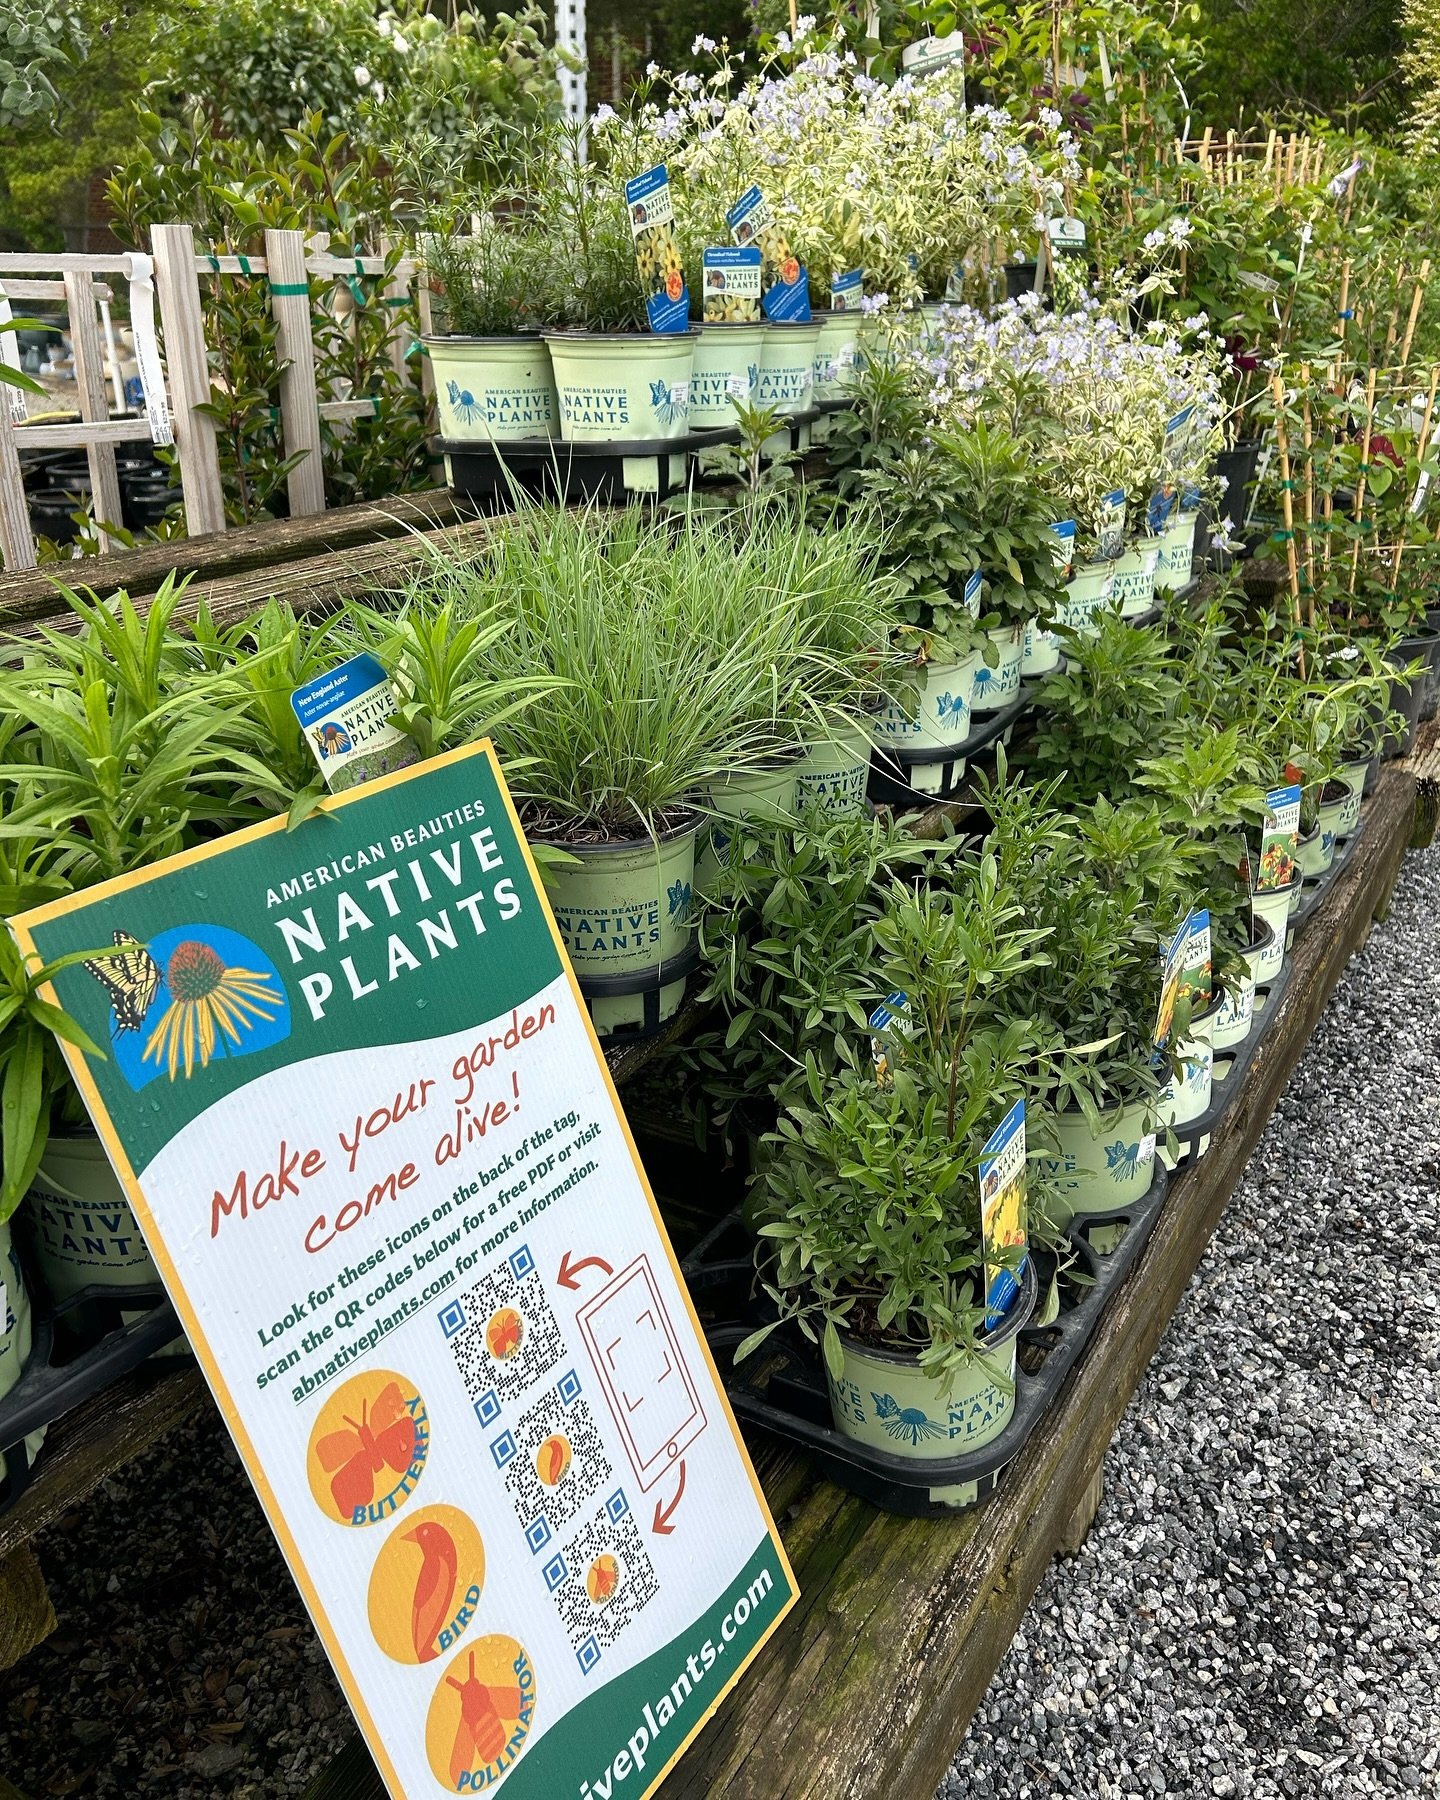 🏡Looking to plant natives? We are building a section for that! All of the plants in light green native plant containers are native plants that will thrive in your garden. 

☀️Stop by this weekend and find your new favorite perennial! 

#perennial #n